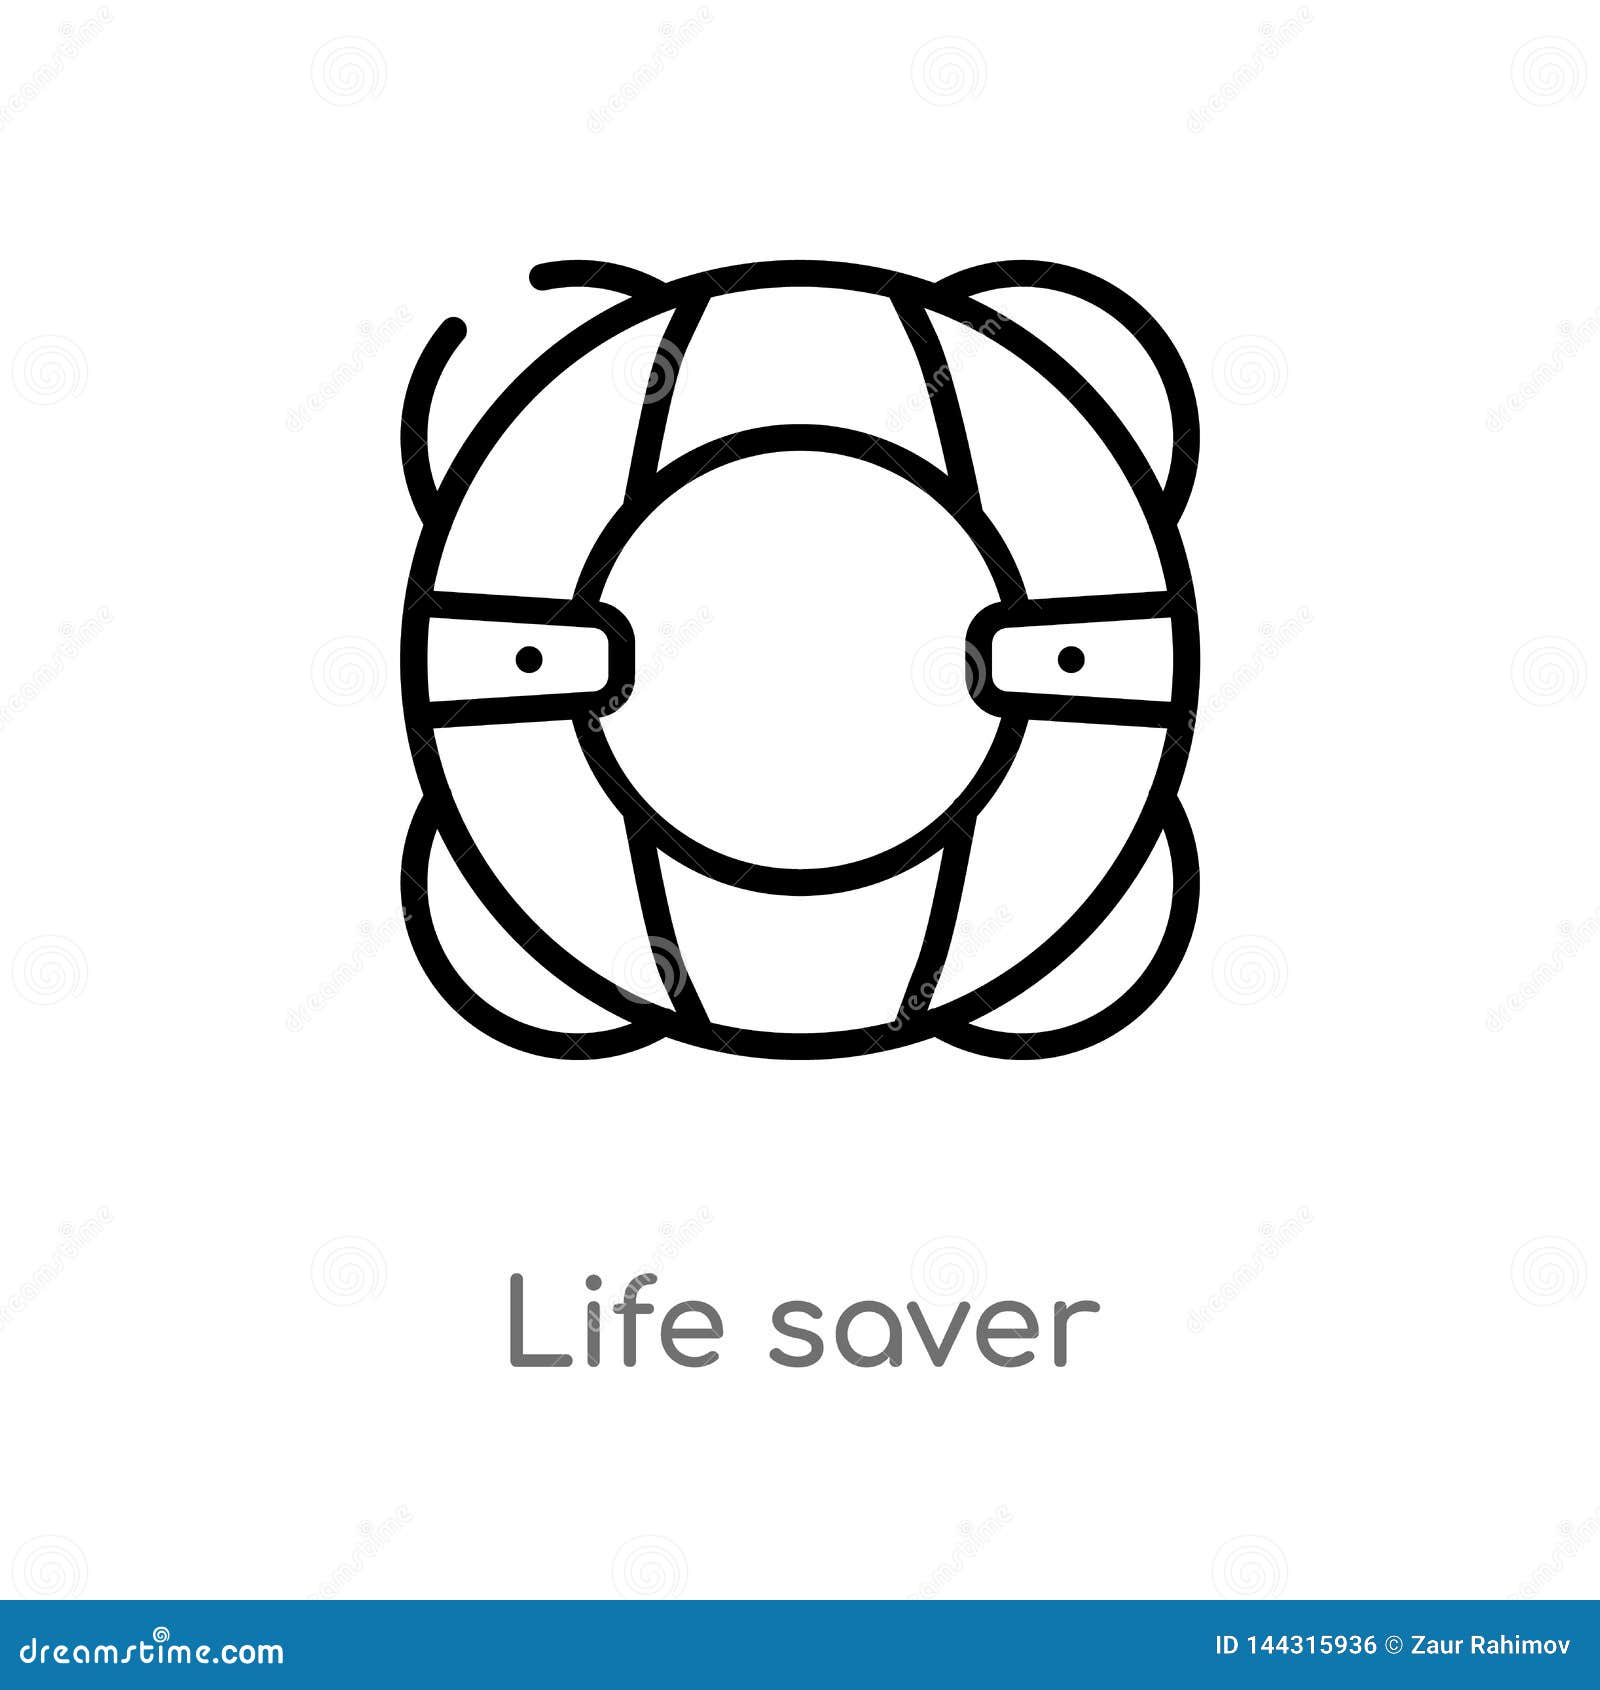 Outline Life Saver Vector Icon. Isolated Black Simple Line Element